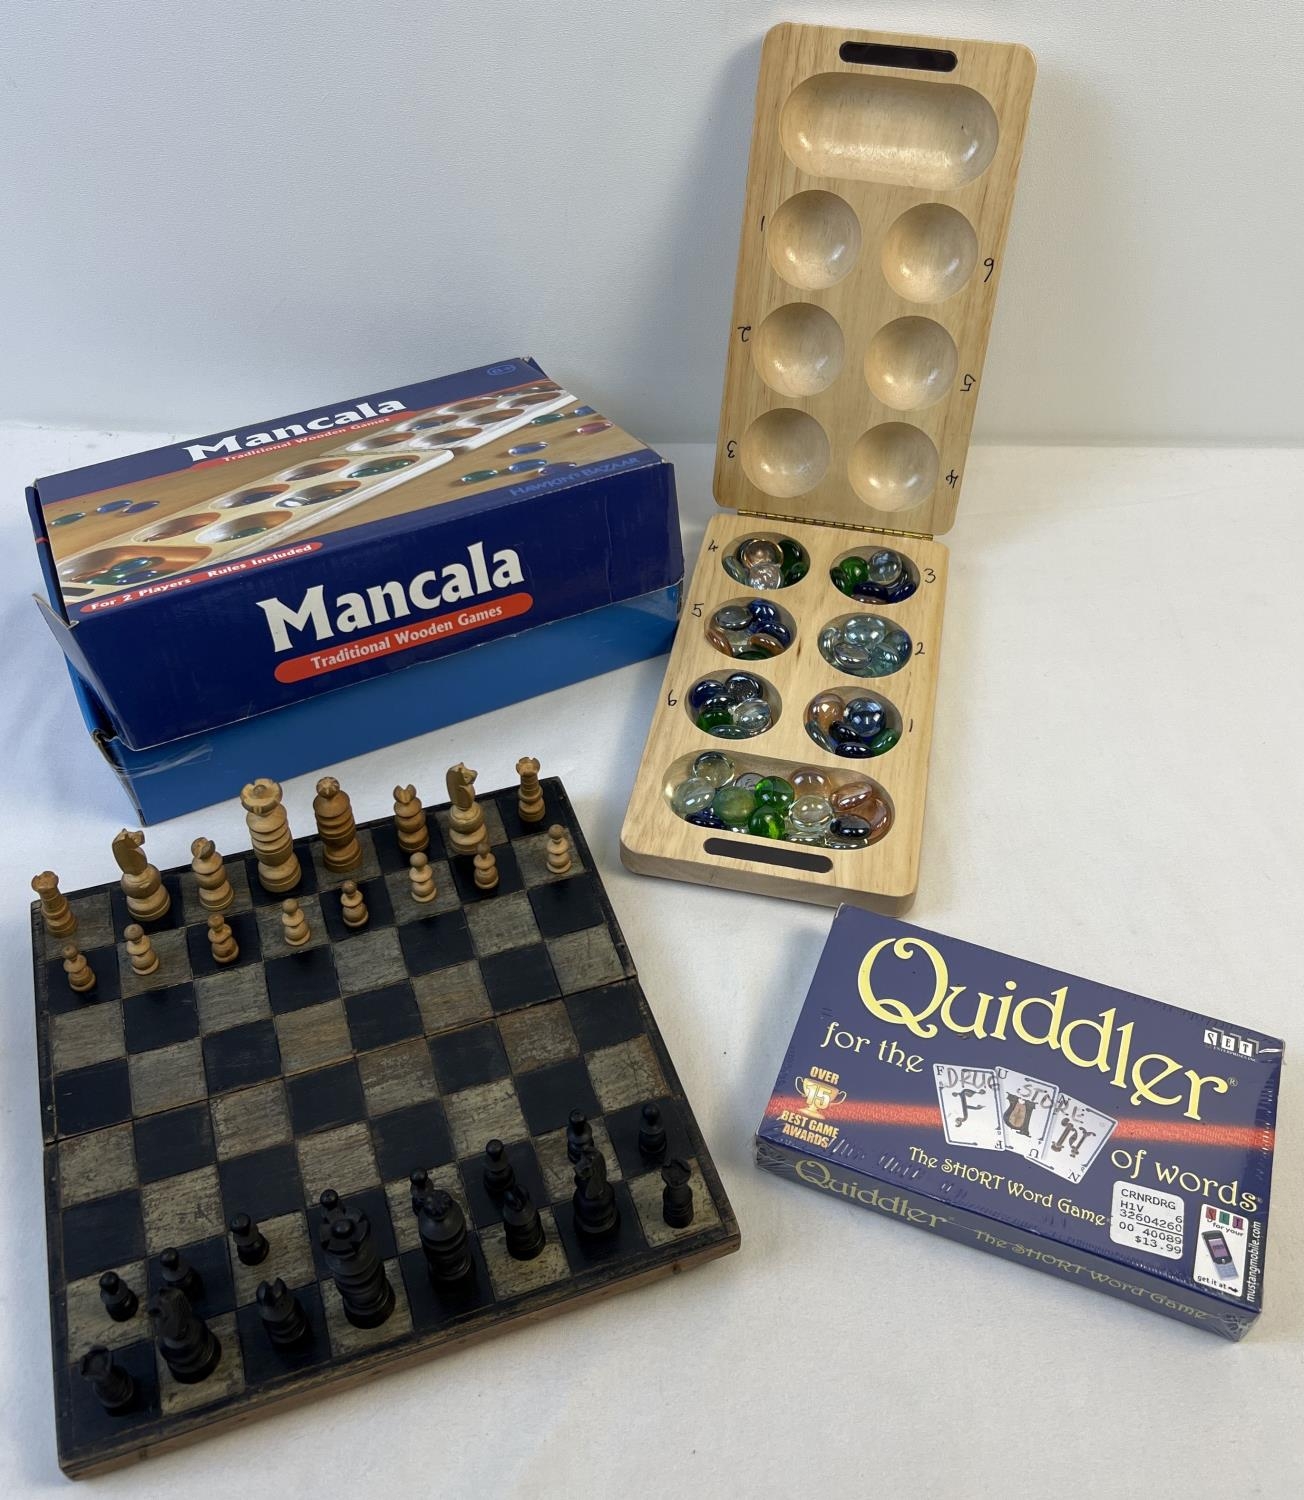 3 traditional games. Boxed Mancala game complete with glass pieces, a wooden chess set and a boxed